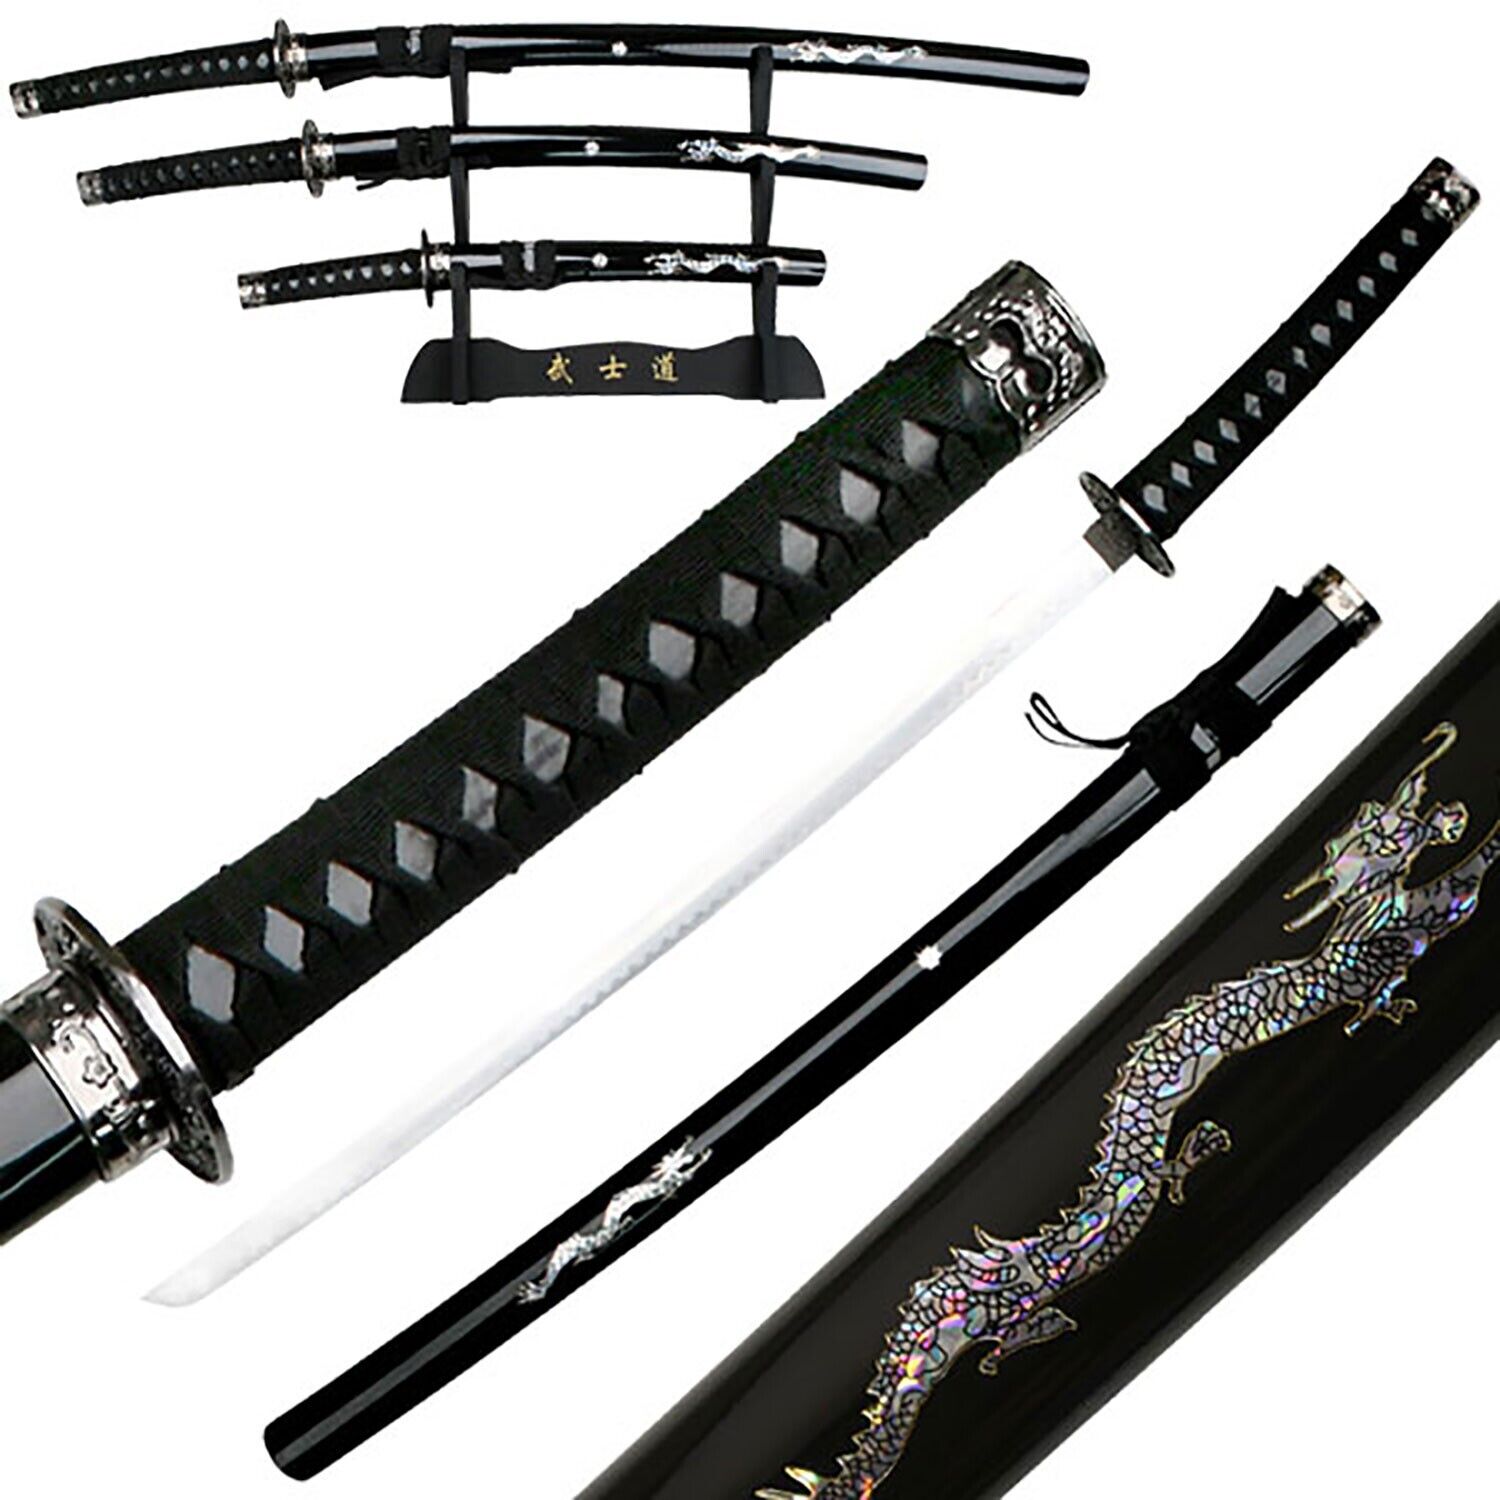 SET OF 3 SAMURAI SWORDS WITH STAND IN BLACK SCABBARD  JS-697